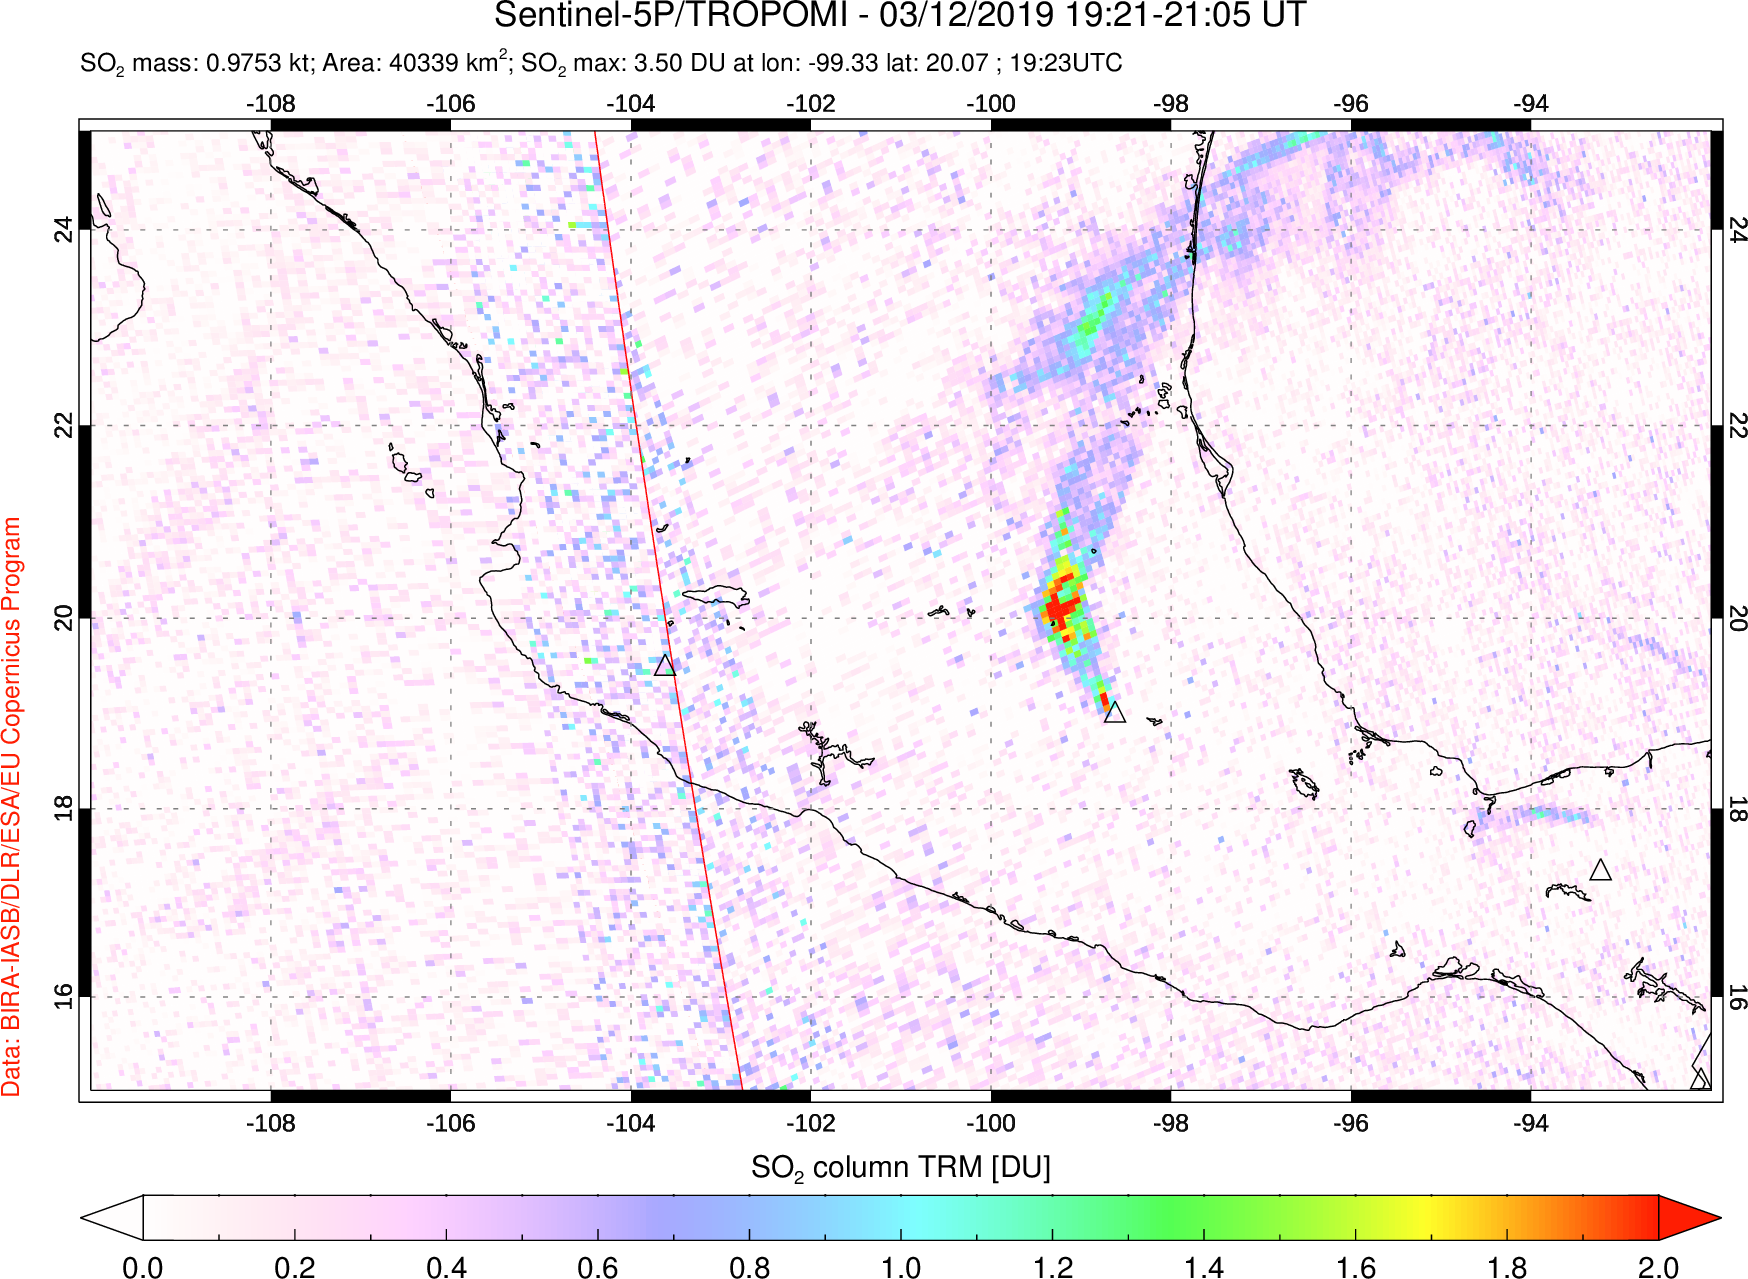 A sulfur dioxide image over Mexico on Mar 12, 2019.